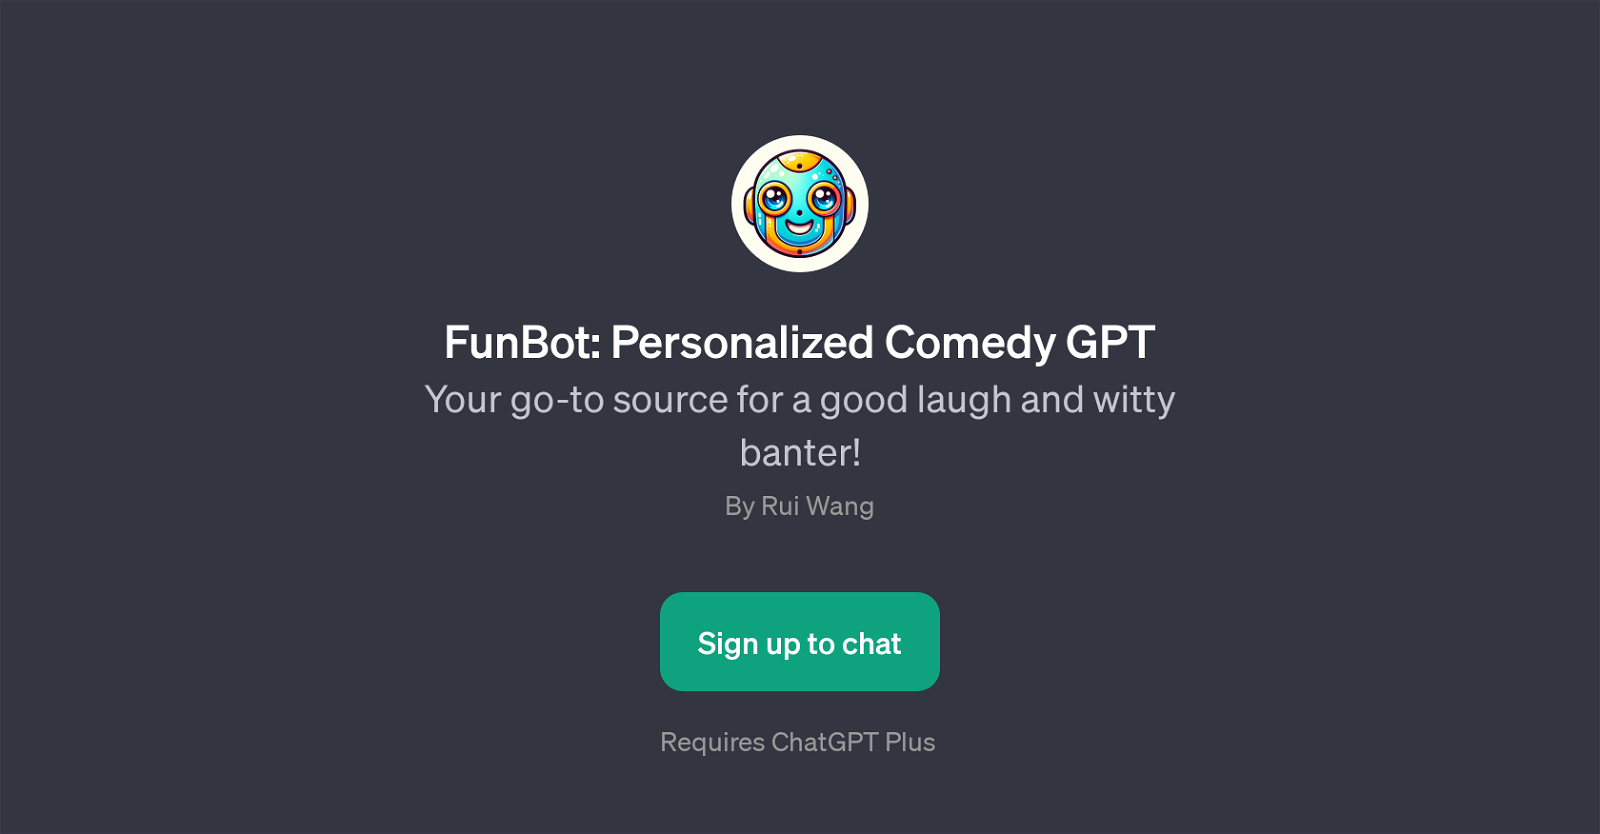 FunBot: Personalized Comedy GPT website